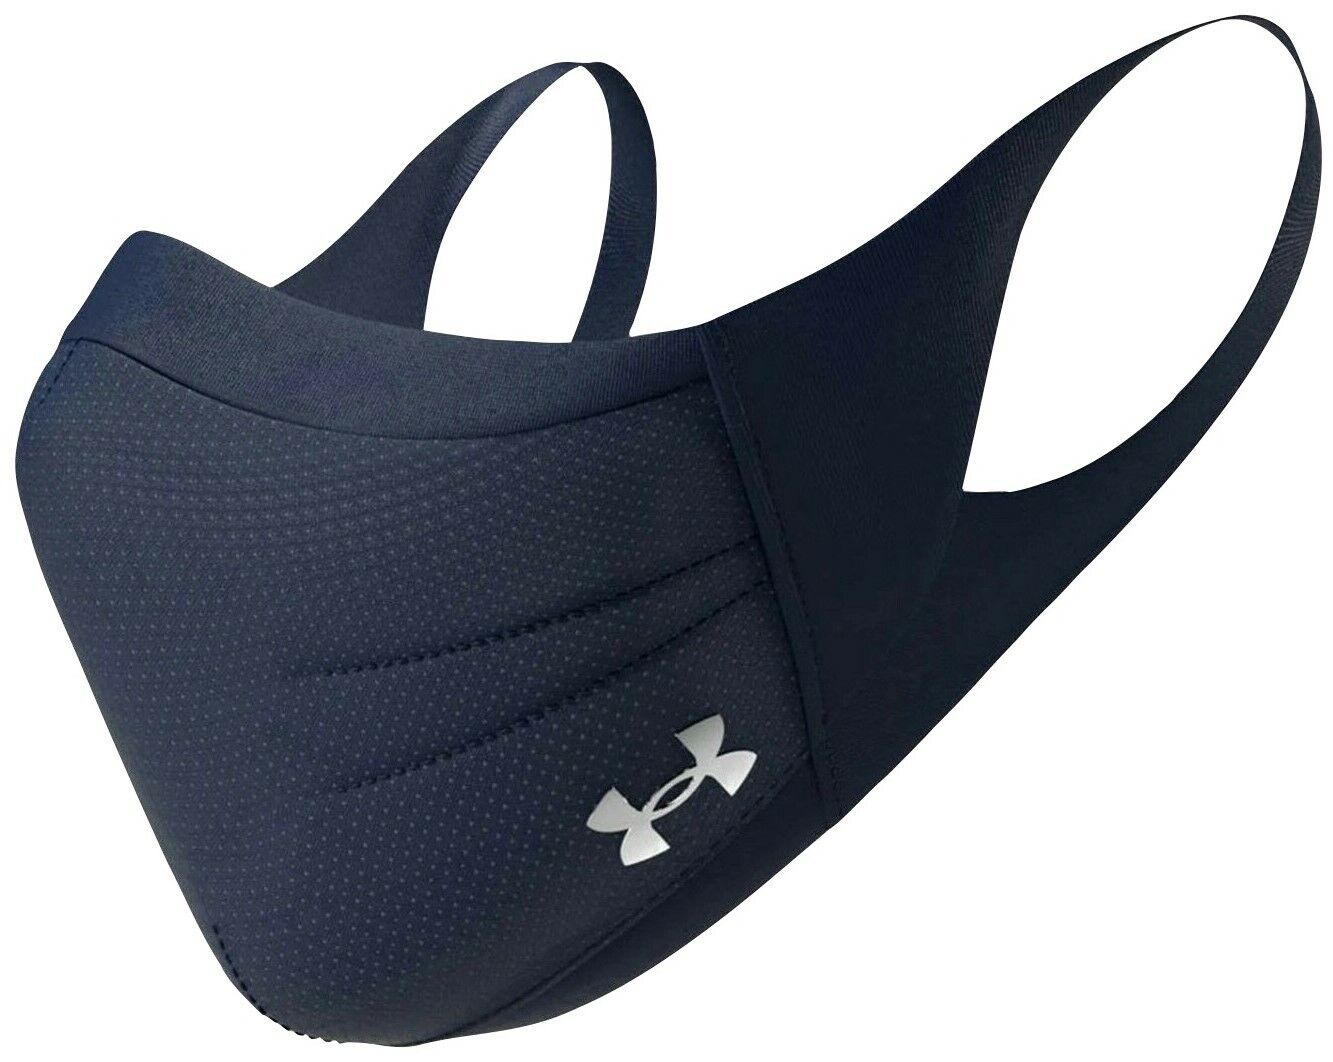 Under Armour Sports Face Mask PITCH / MOD NAVY Adult ALL SIZES Fast Shipping NEW